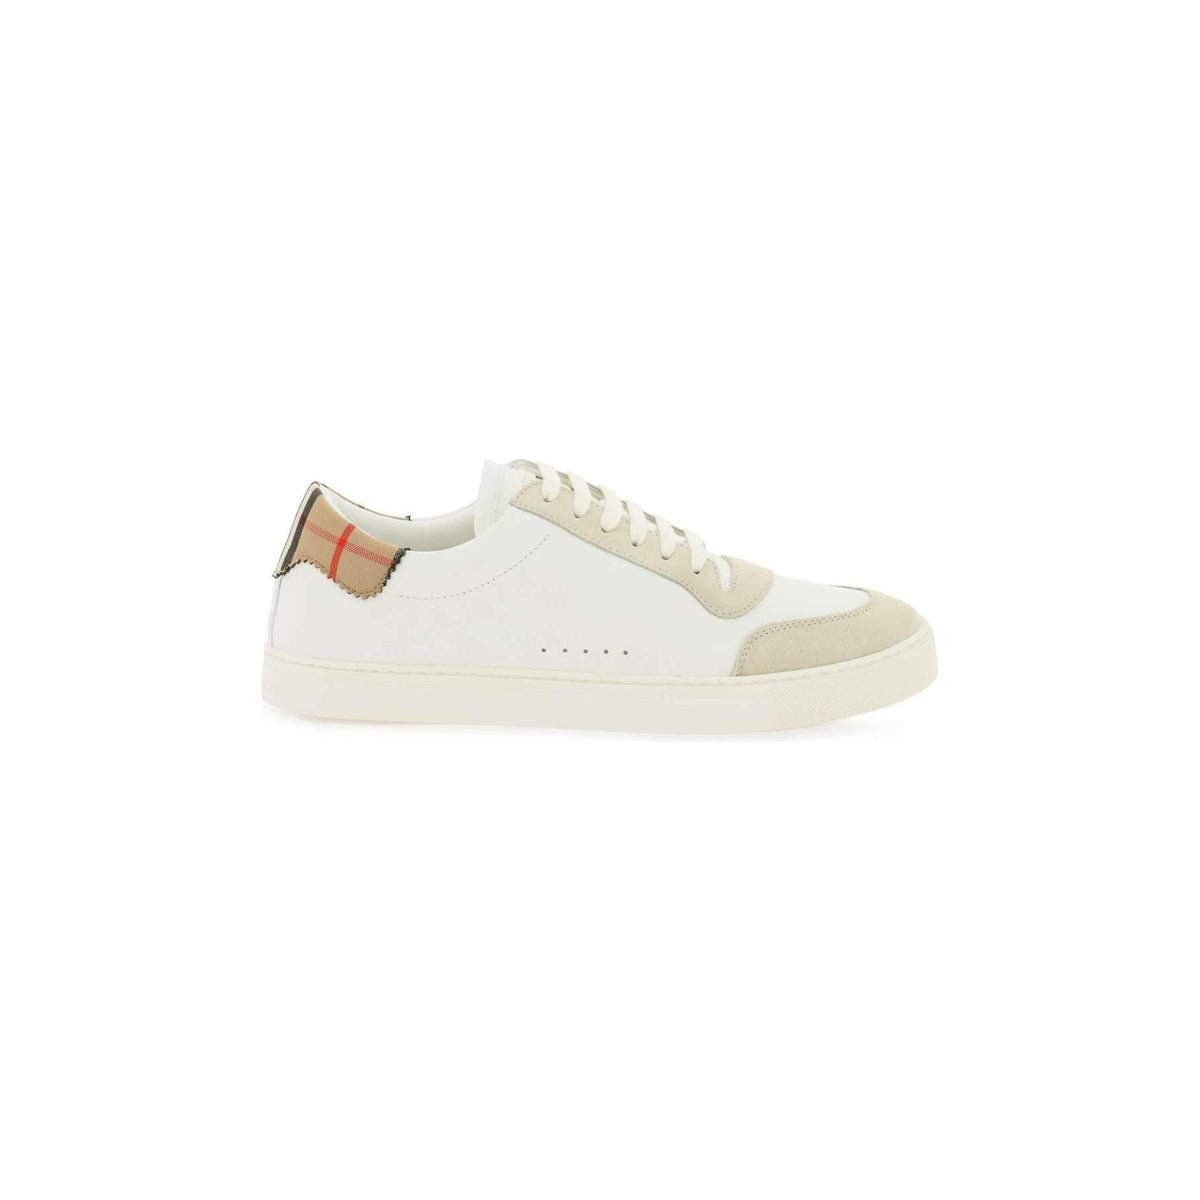 BURBERRY - Neutral White Leather, Suede and Check Cotton Sneakers - JOHN JULIA